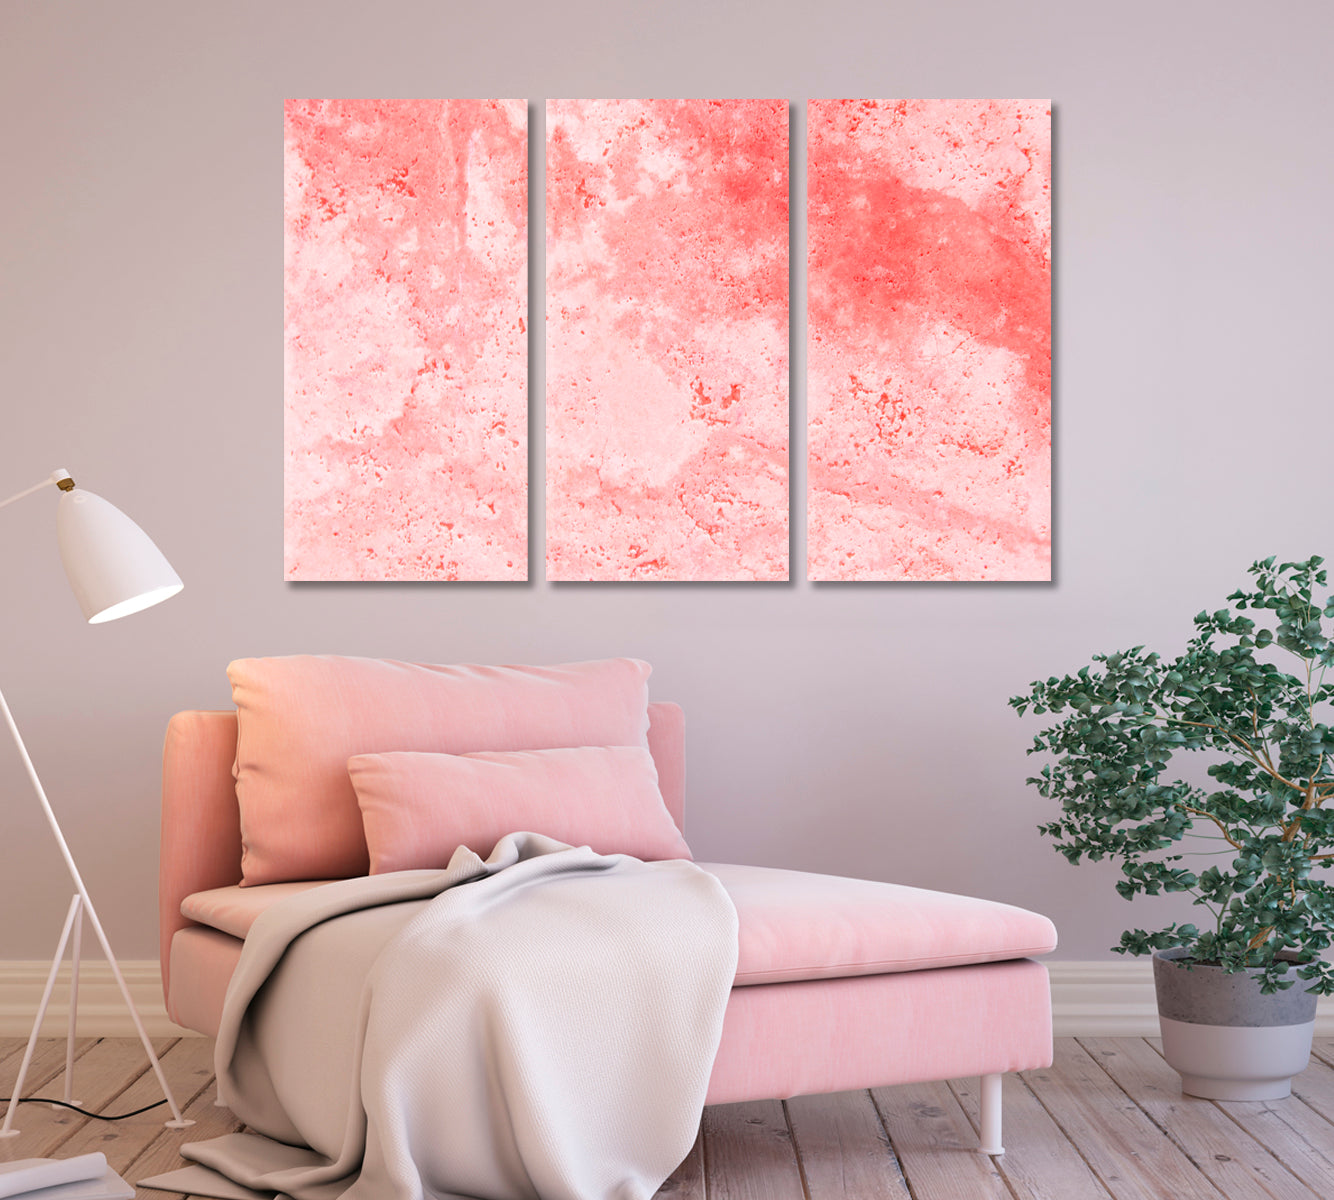 Delicate Pink Marble Abstraction Canvas Print-Canvas Print-CetArt-3 Panels-36x24 inches-CetArt